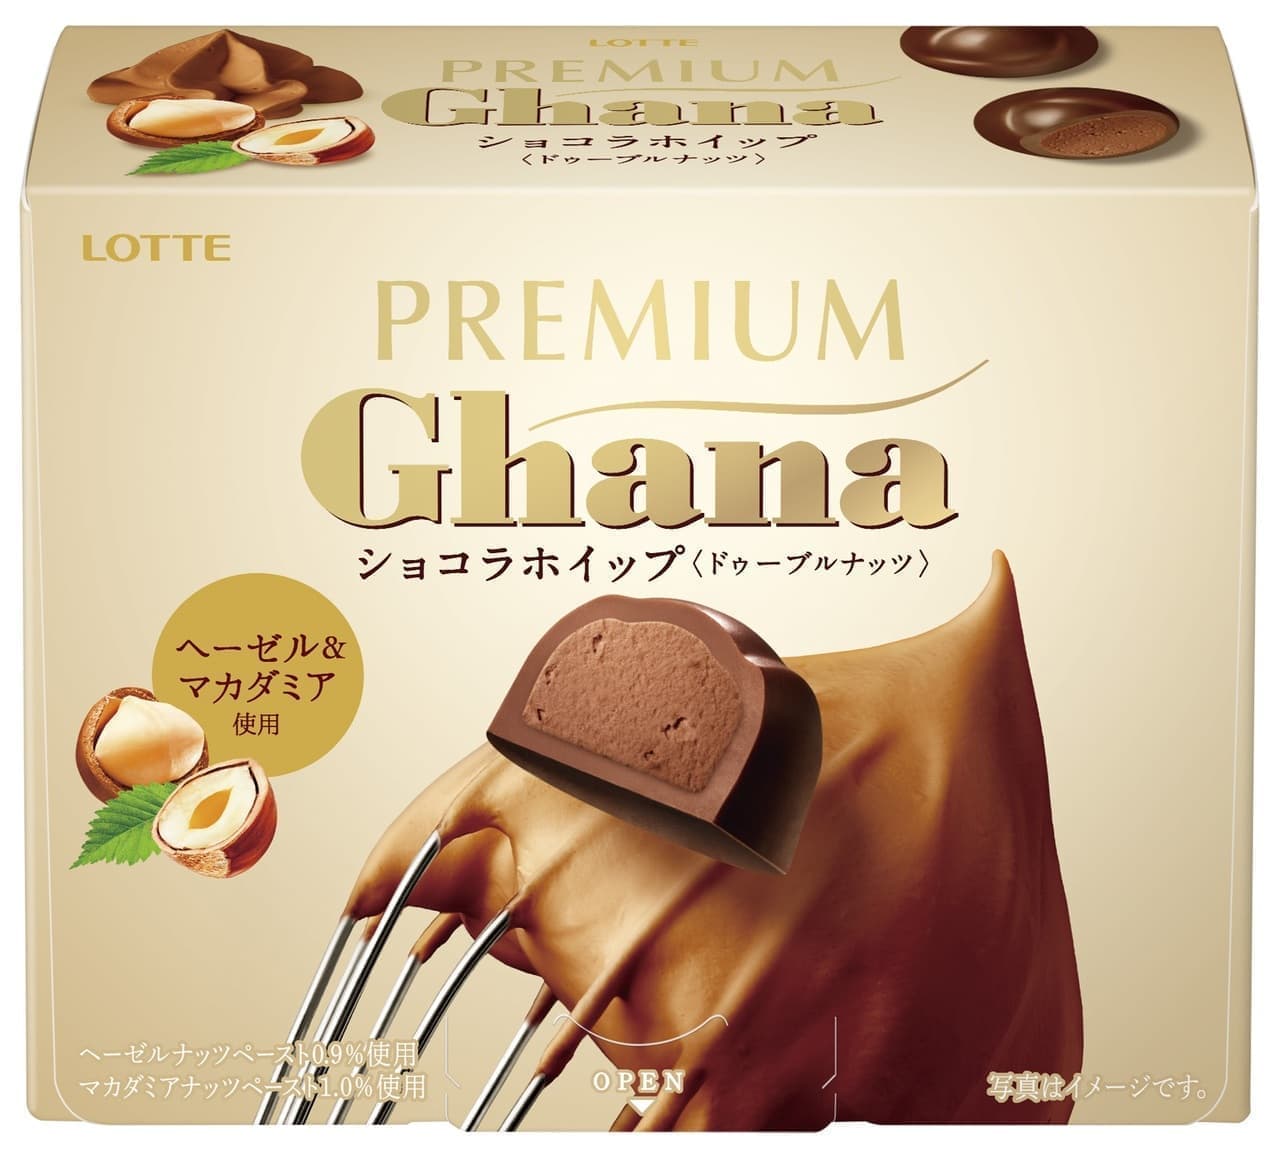 Lotte "Premium Ghana Chocolat Whip [Double Nuts]".